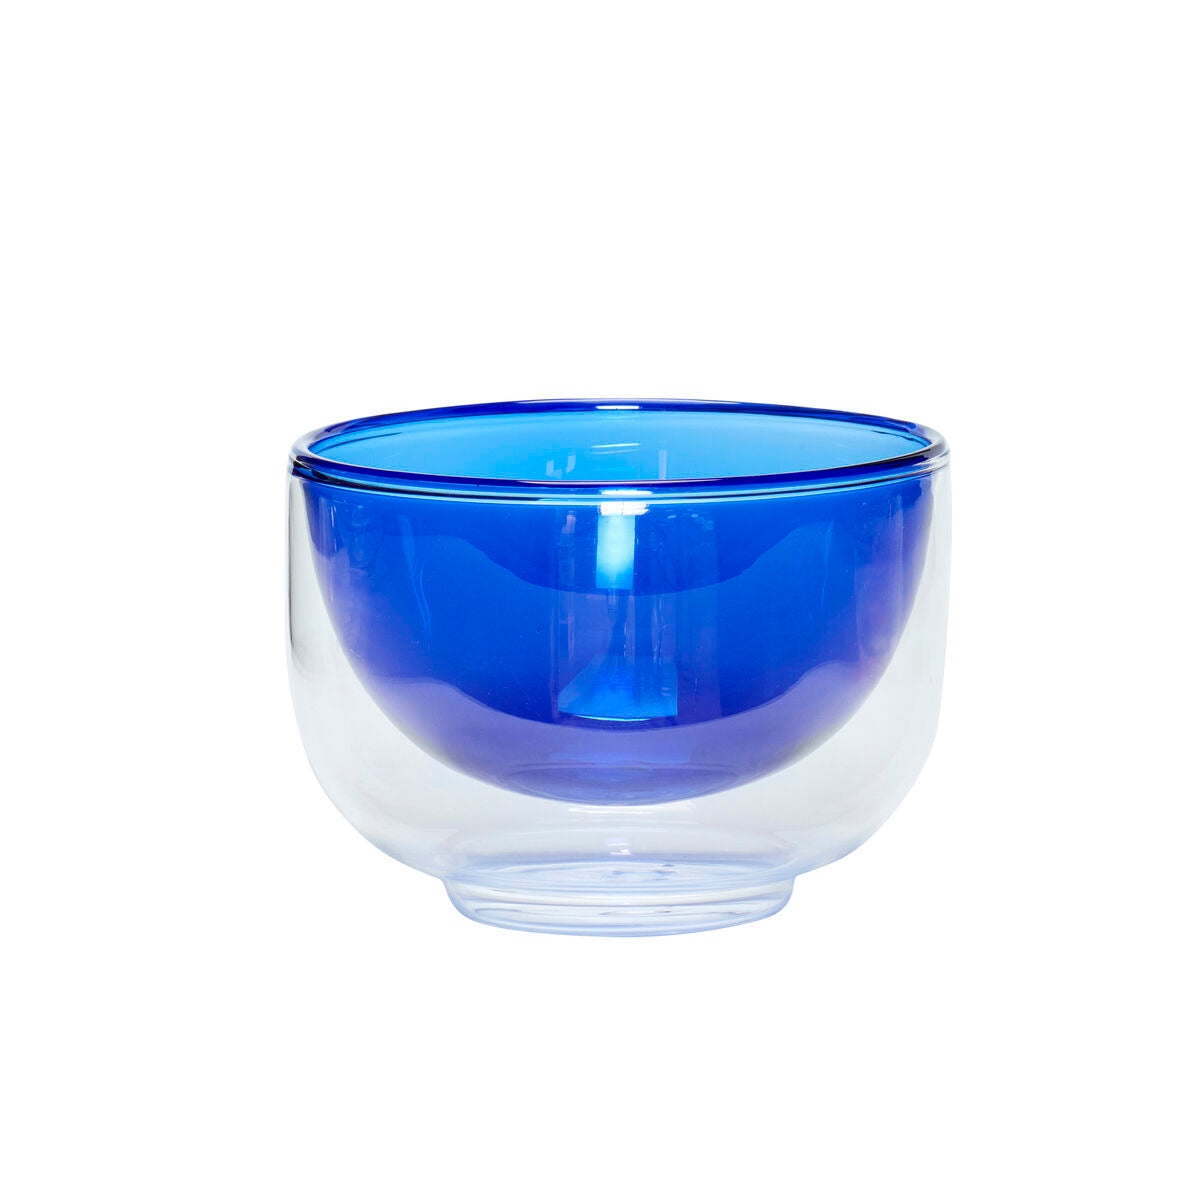 A kiosk is a practical and decorative bowl. It will allow you to serve a way of snacks, thanks to the elegant making of transparent and colored glass.